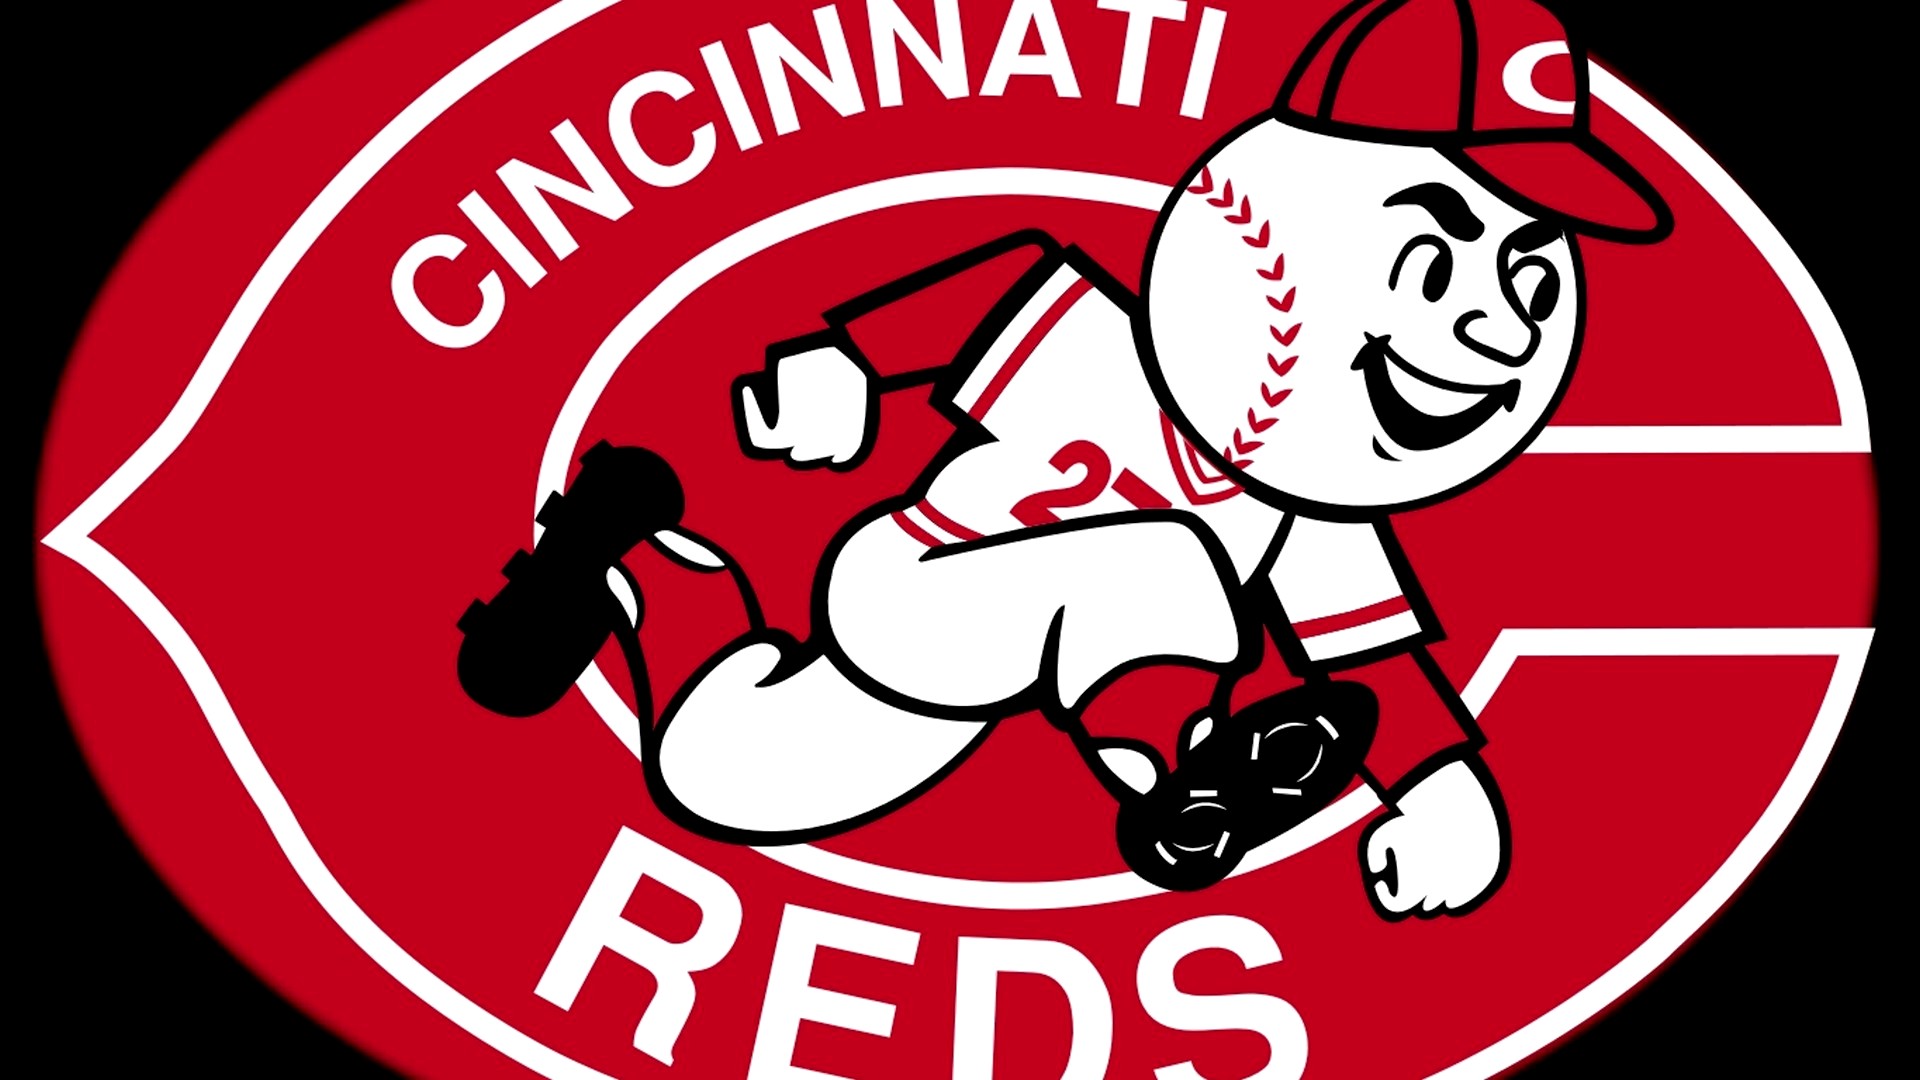 Cincinnati Reds Wallpaper HD with high-resolution 1920x1080 pixel. You can use this wallpaper for Mac Desktop Wallpaper, Laptop Screensavers, Android Wallpapers, Tablet or iPhone Home Screen and another mobile phone device